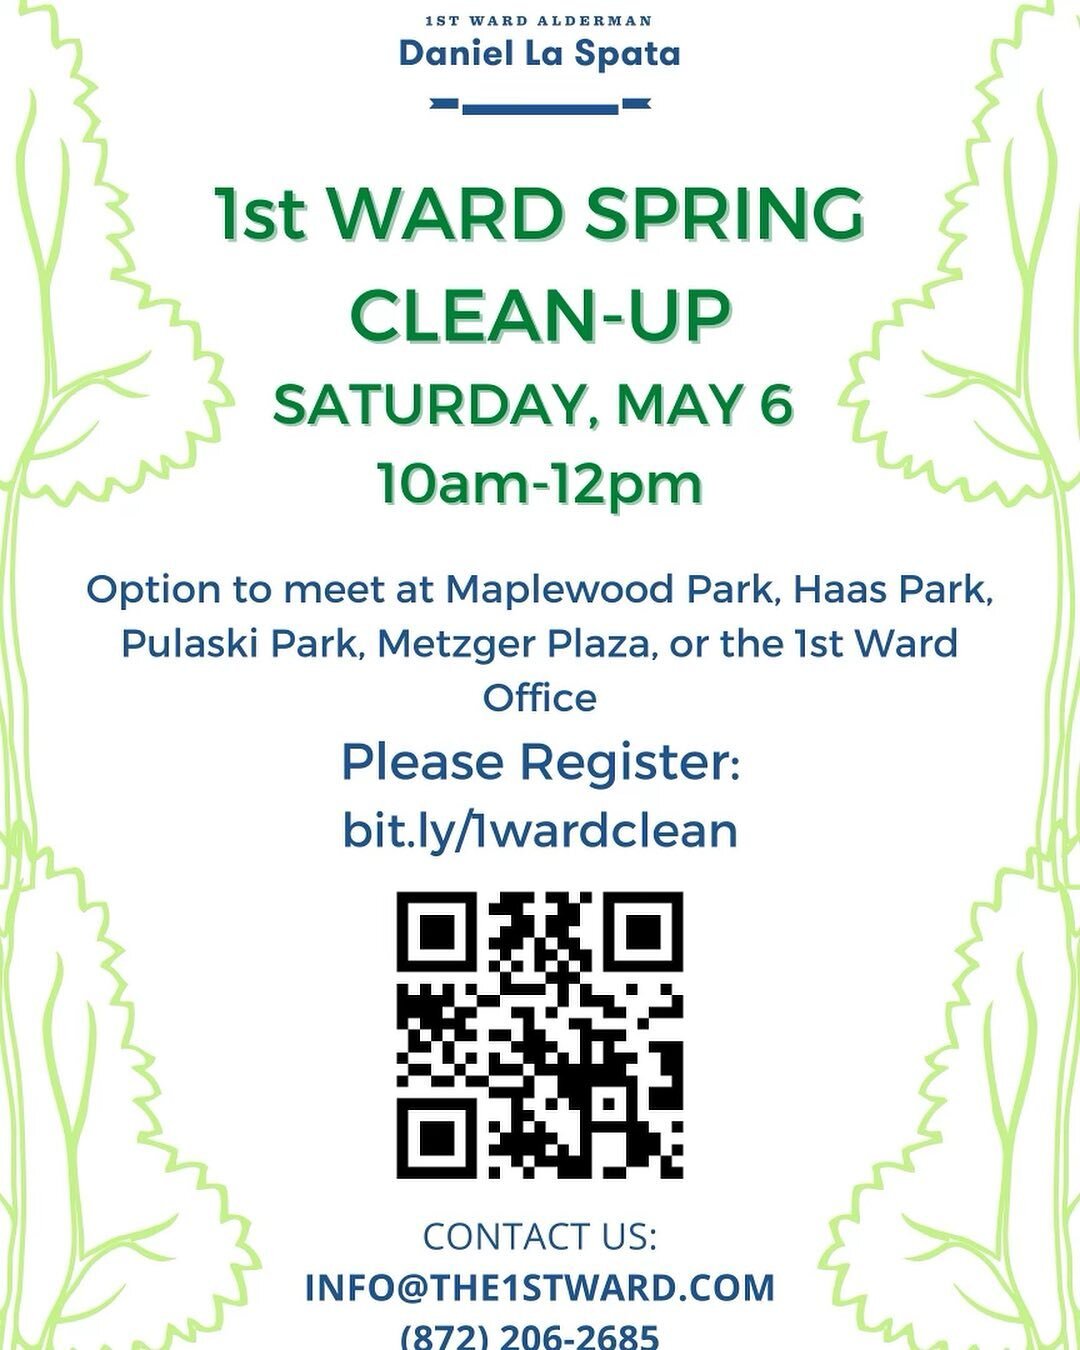 You there! The one with the passion for serving your neighborhood! Yes you! Come join us tomorrow at 10:00 am to clean up the 1st ward! Details in the post :)